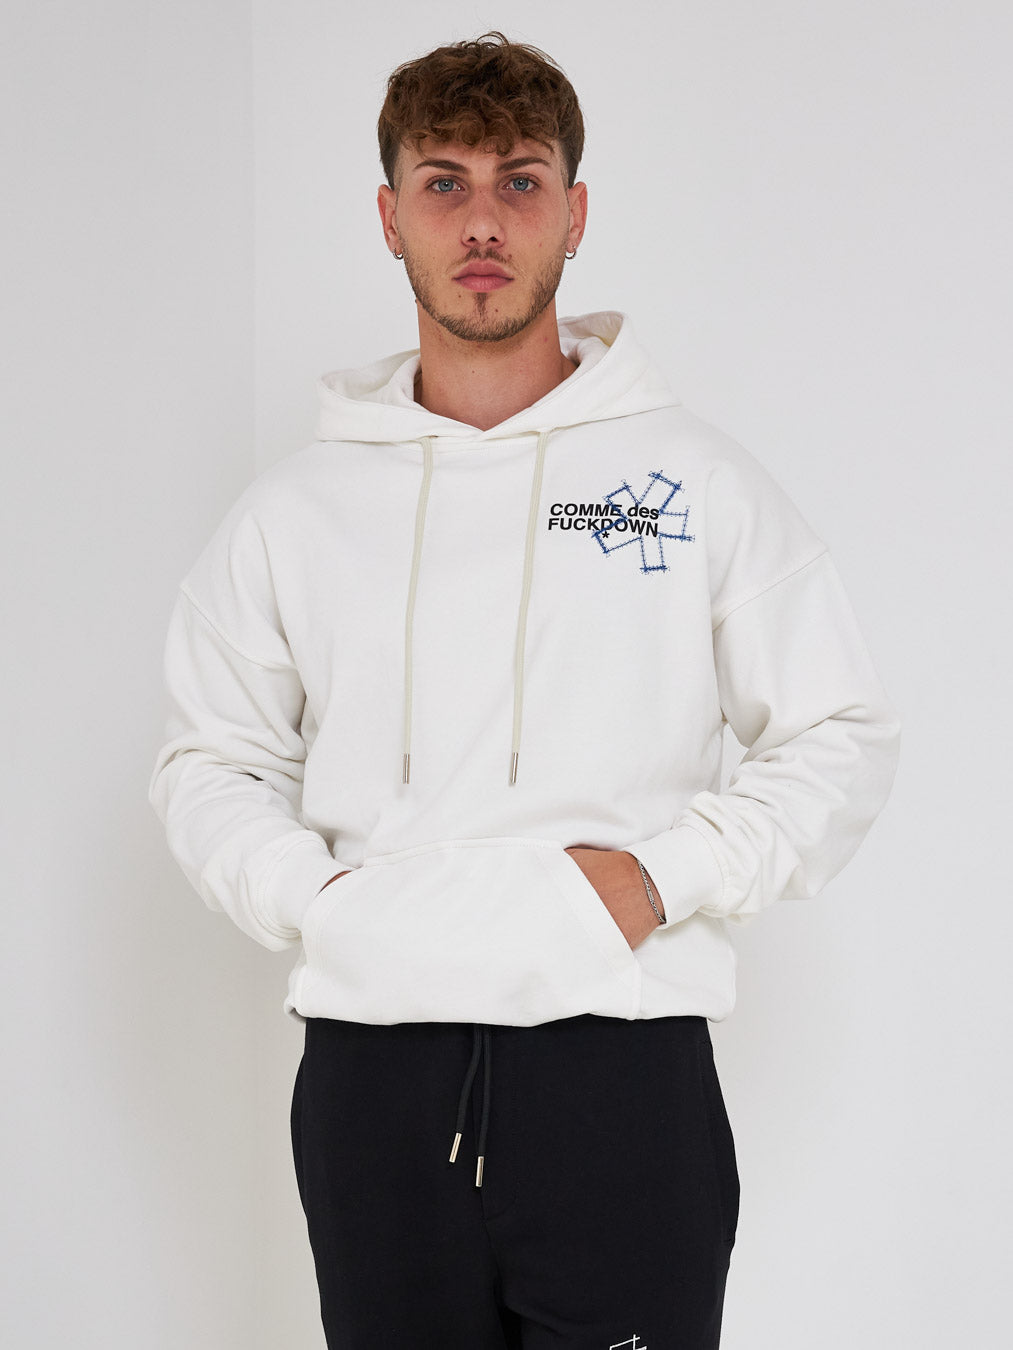 Comme Des Fuckdown white hooded sweatshirt